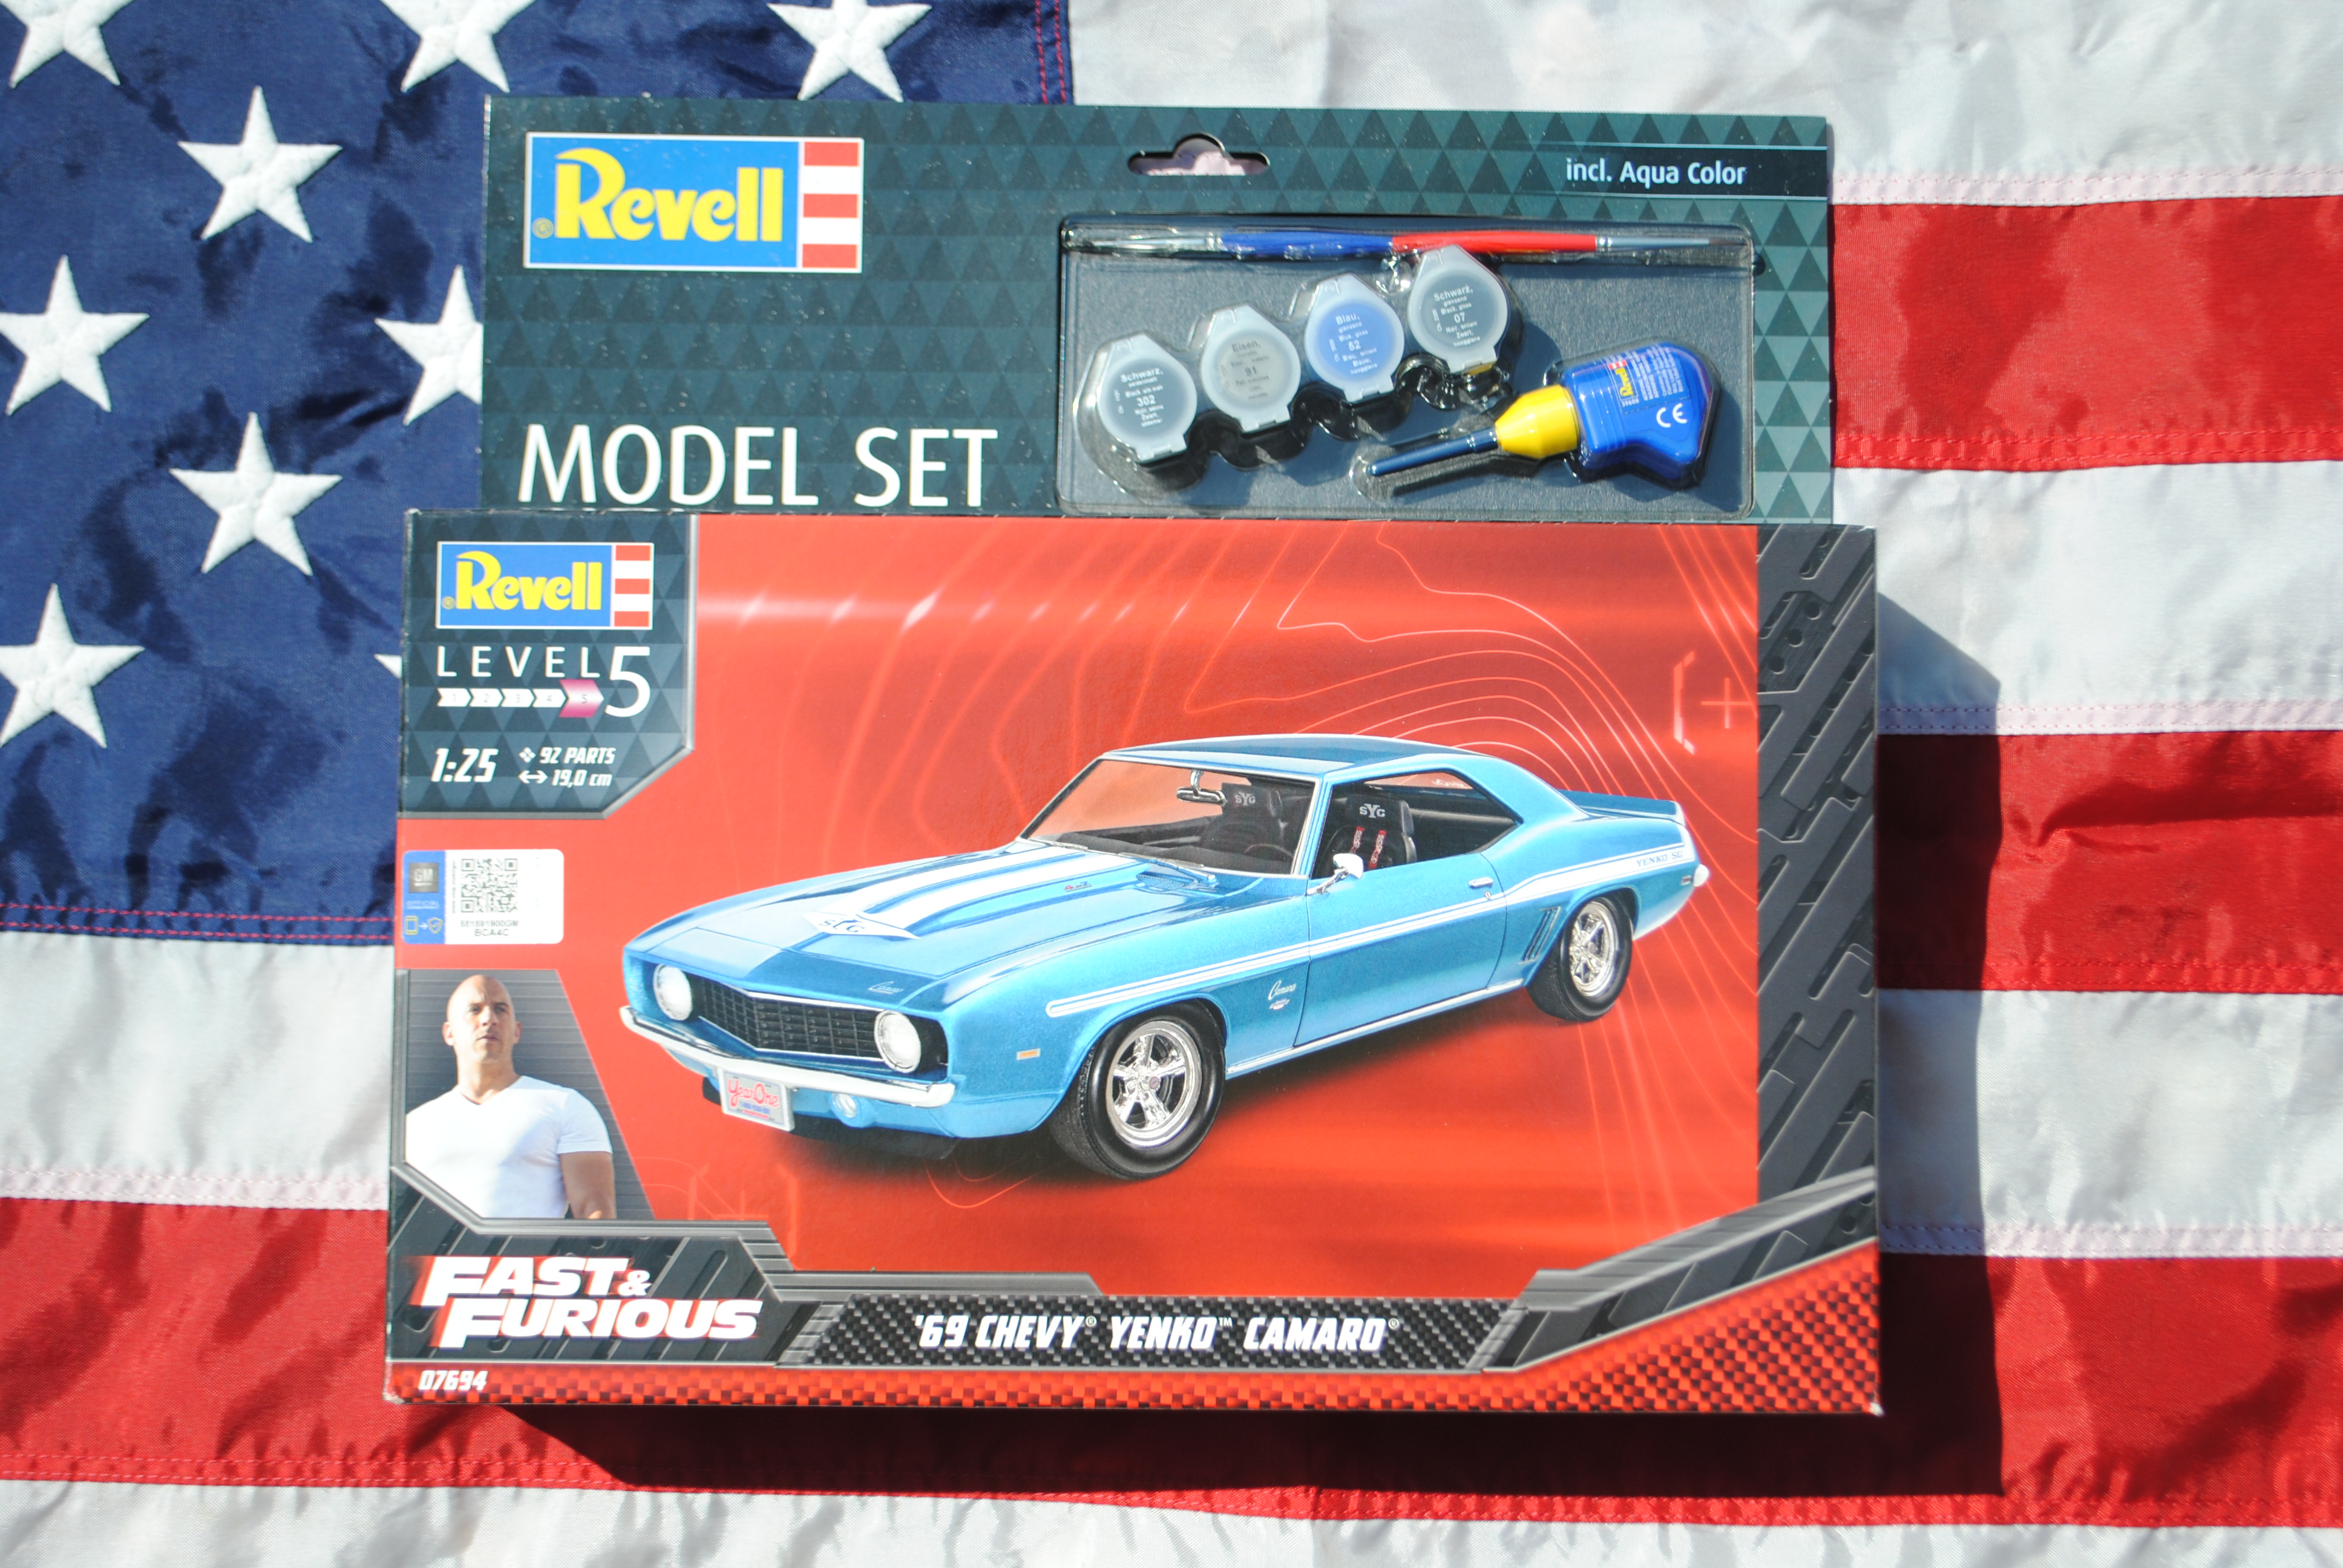 Germany Revell Ag 67694 Model Set Fast & Furious 1969 Chevy Camaro Yenko Incolore 